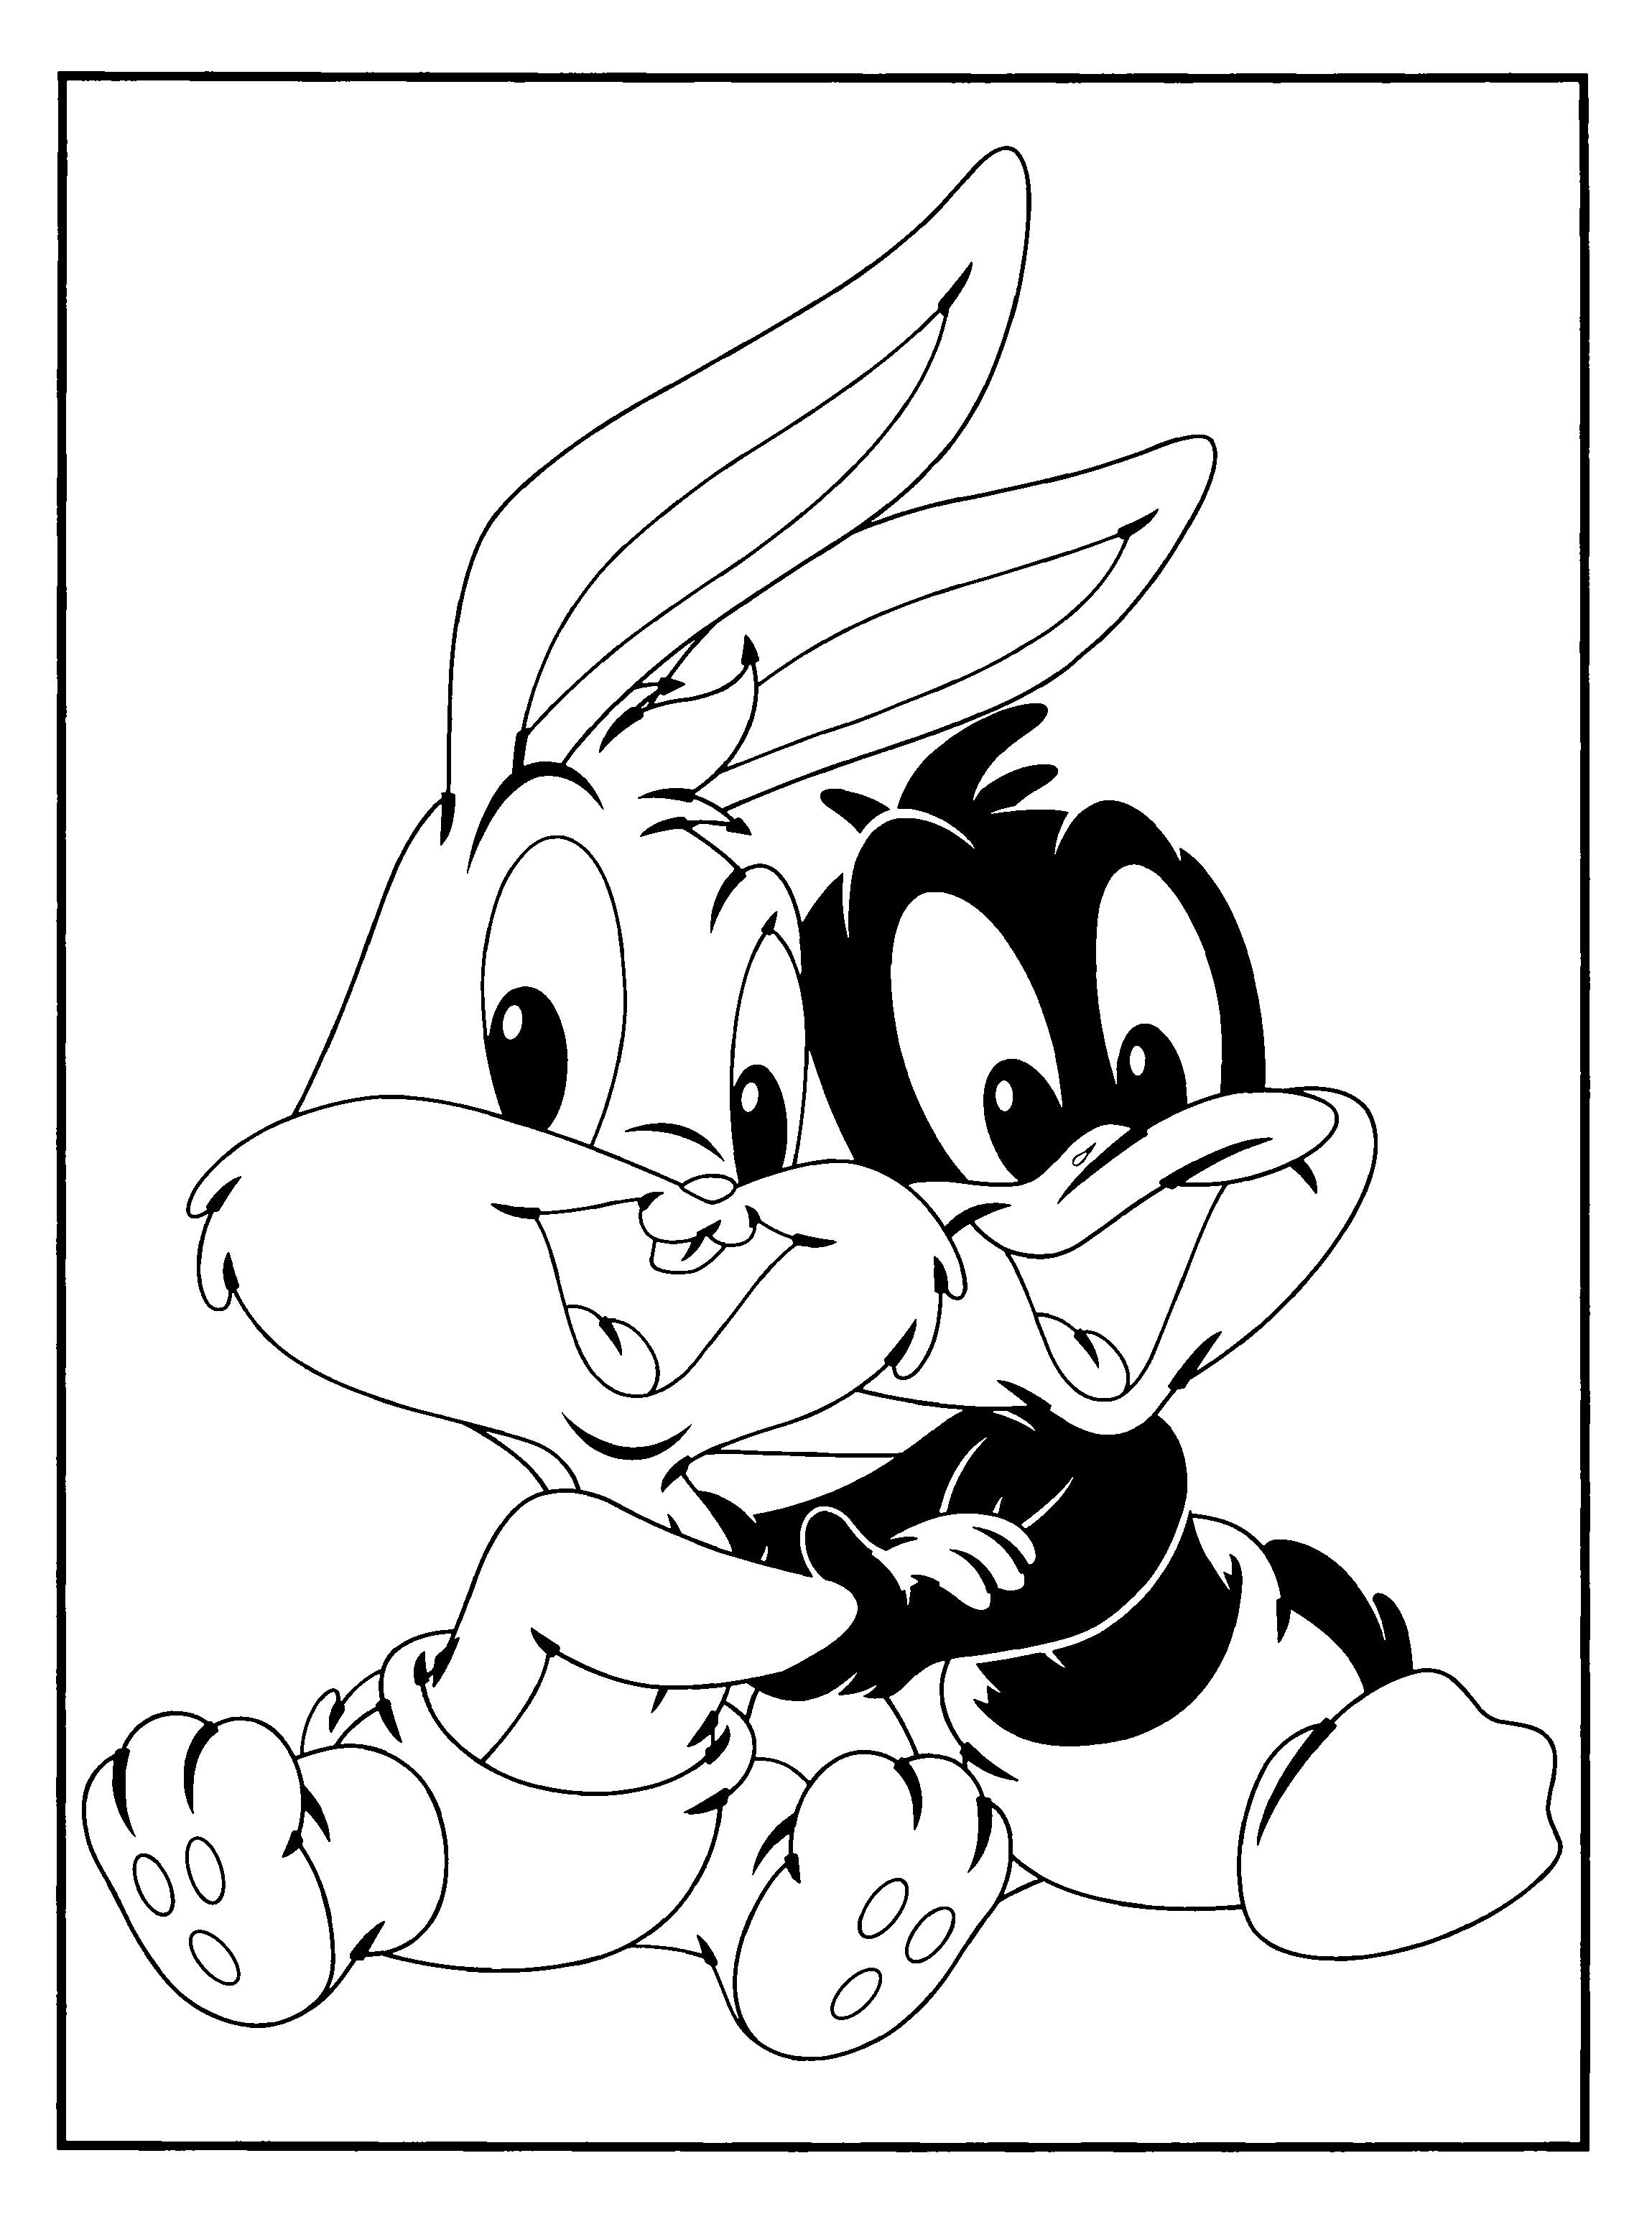 looney tunes colouring pages looney tunes coloring pages coloringpagesabccom pages tunes colouring looney 